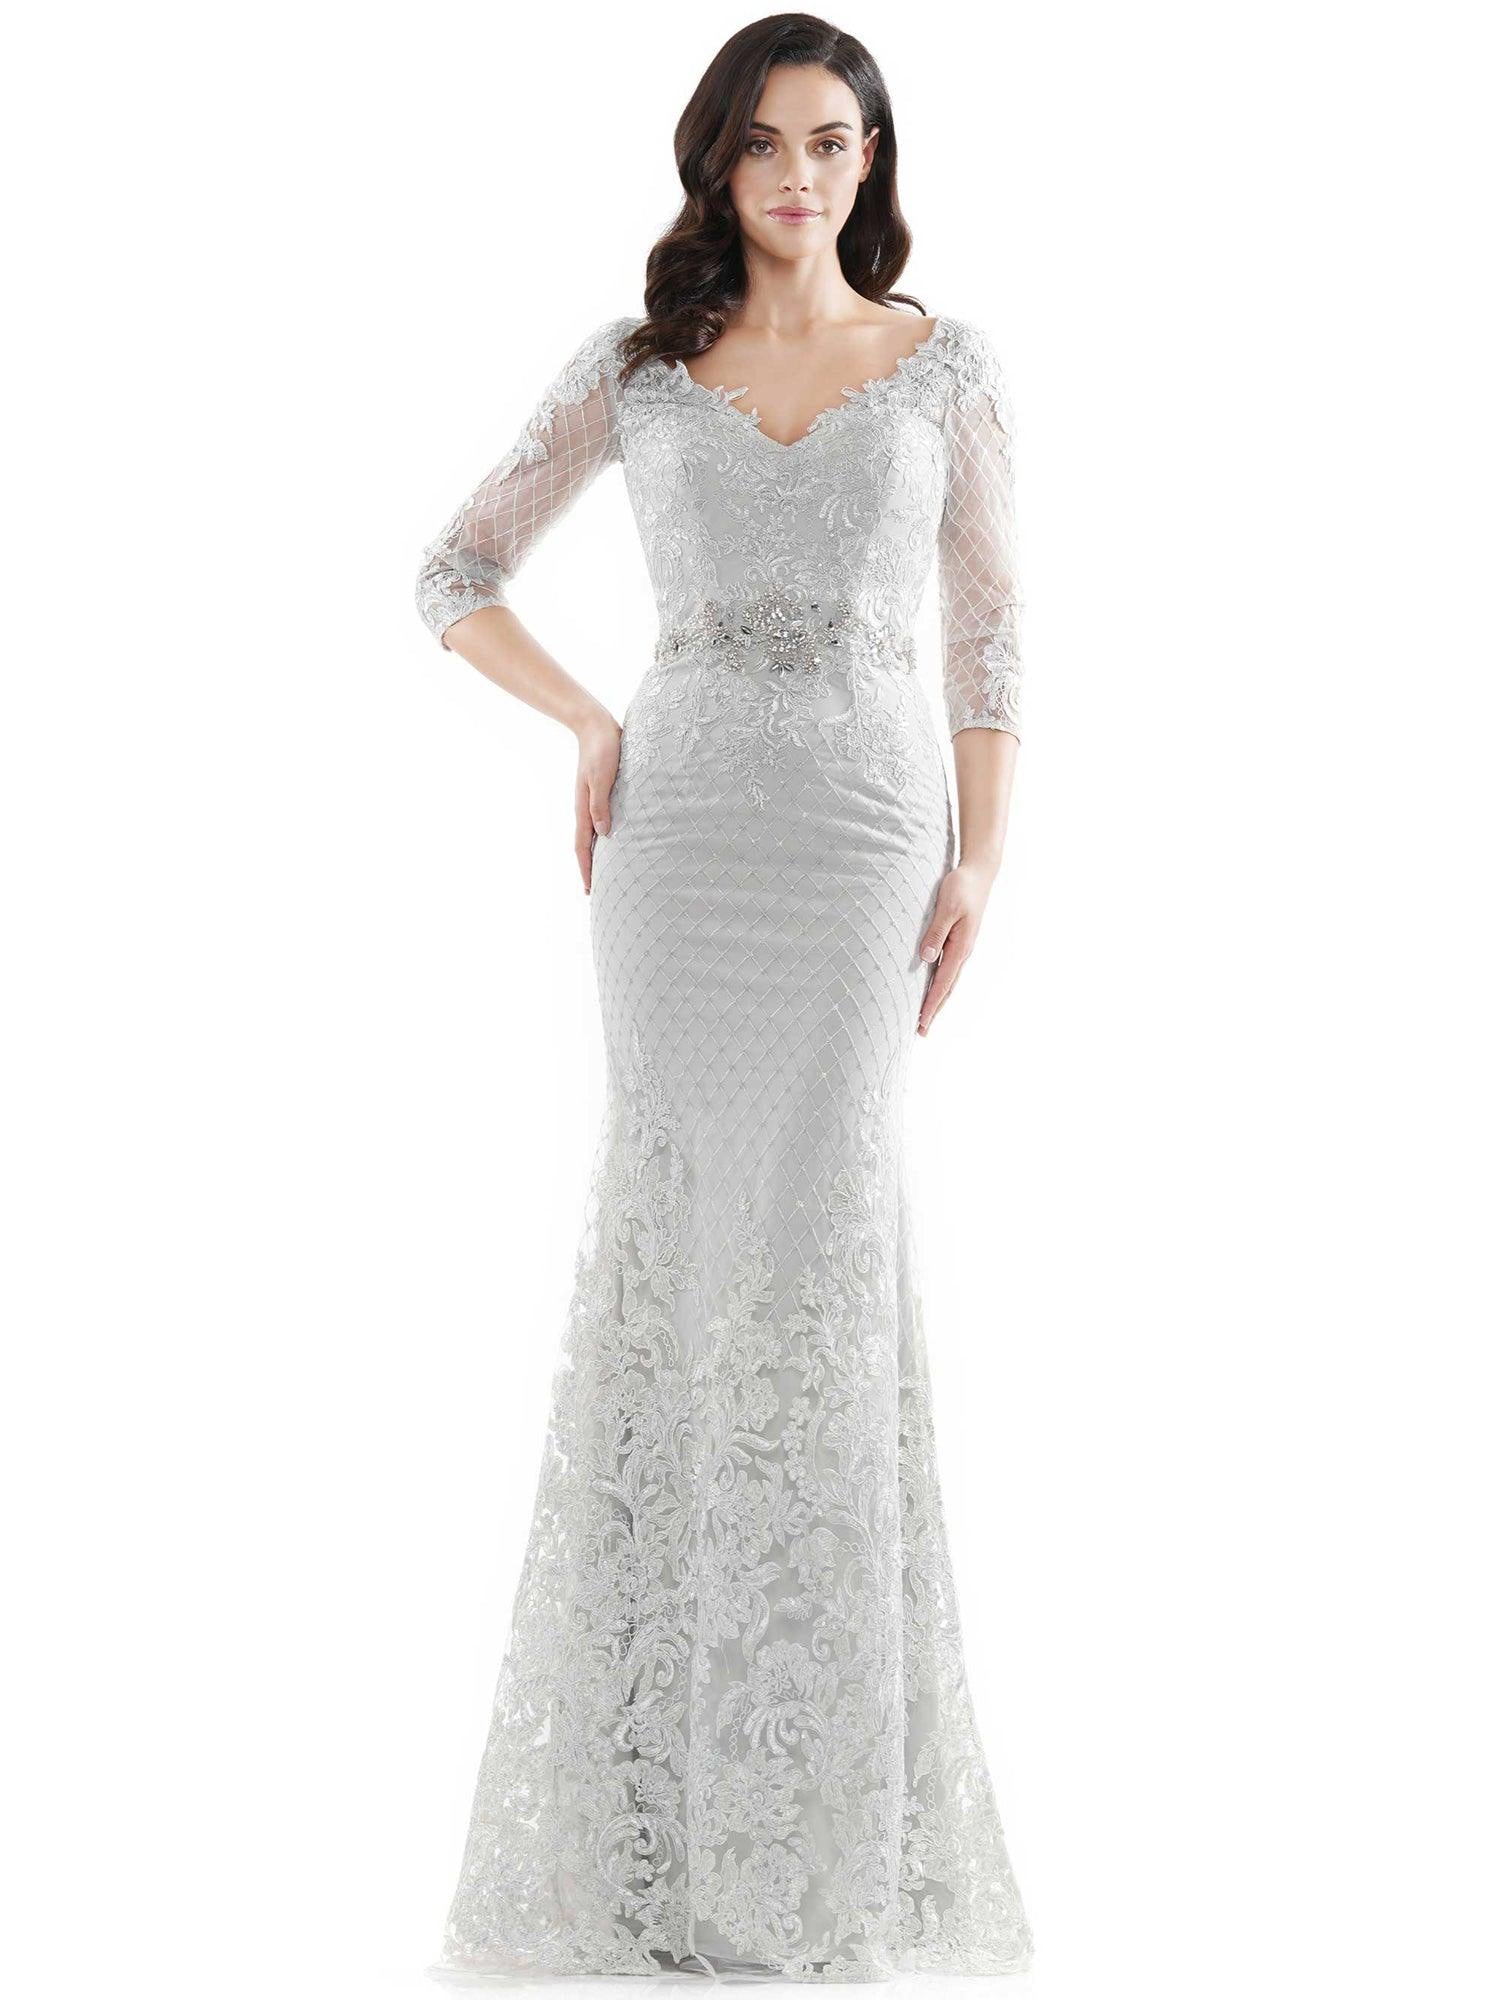 Marsoni Mother of the Bride Long Mermaid Dress 1045 - The Dress Outlet